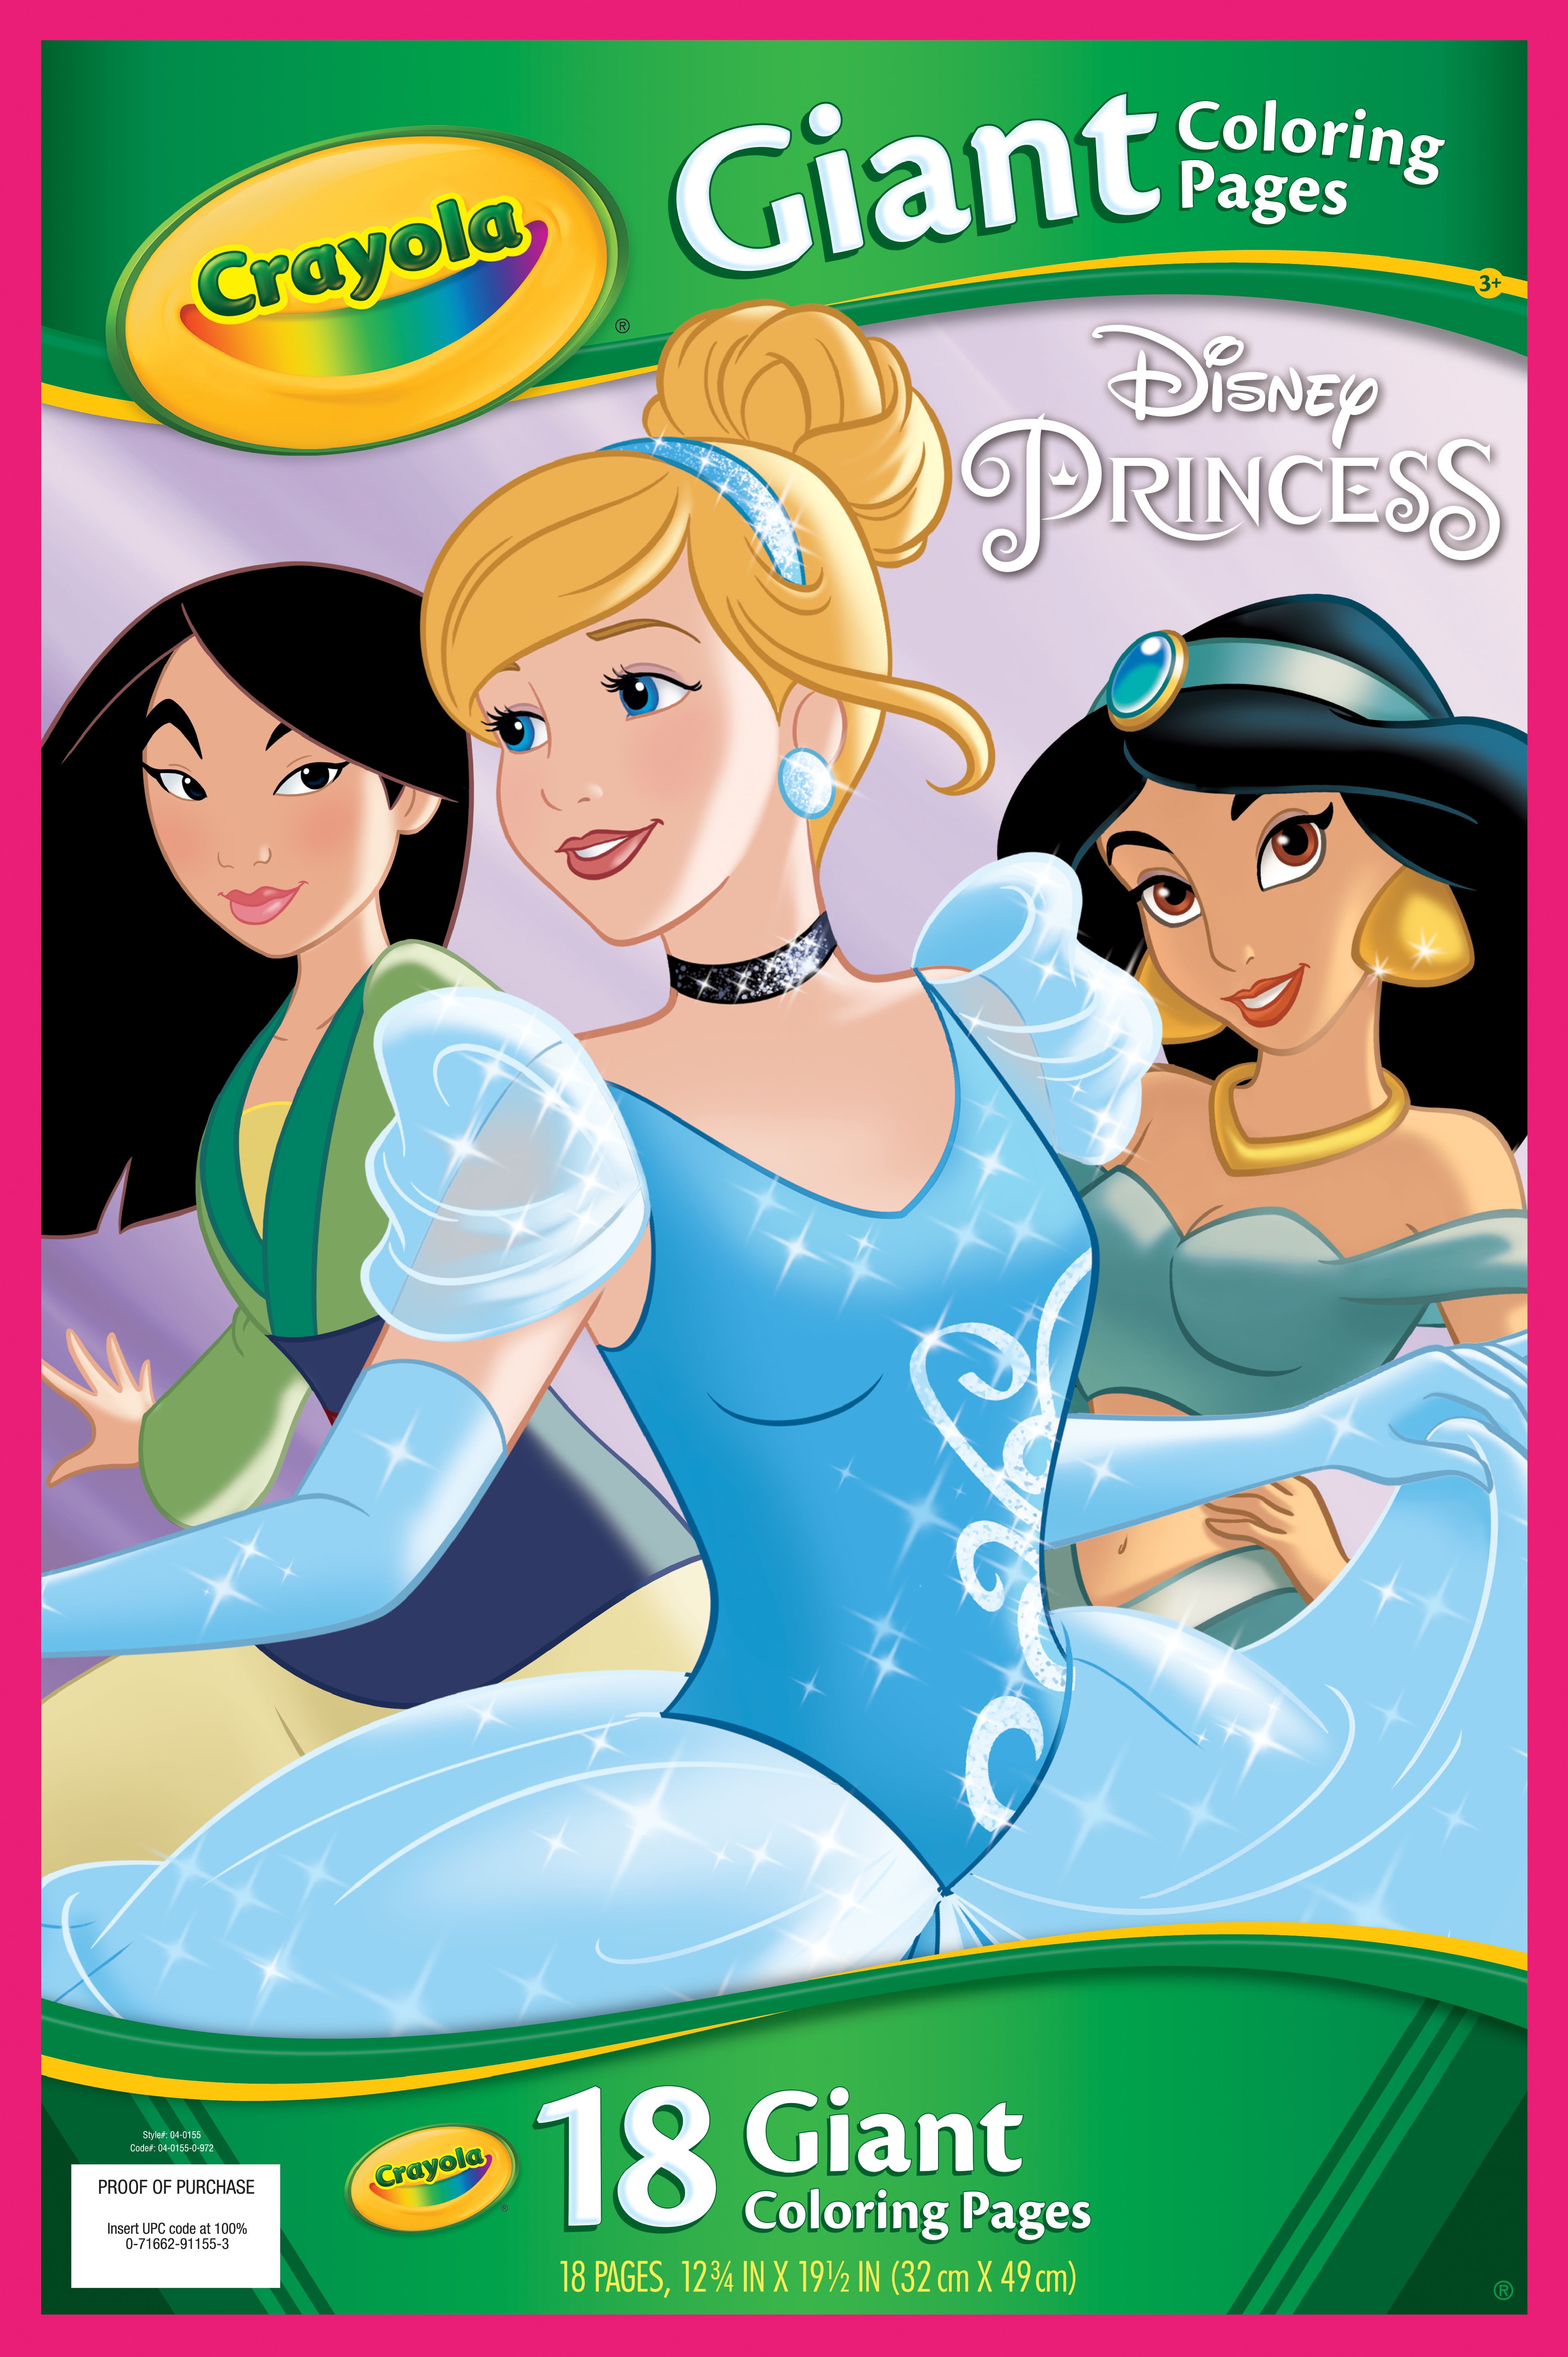 Crayola Giant Coloring Pages Disney Princess, Child, 18 ...